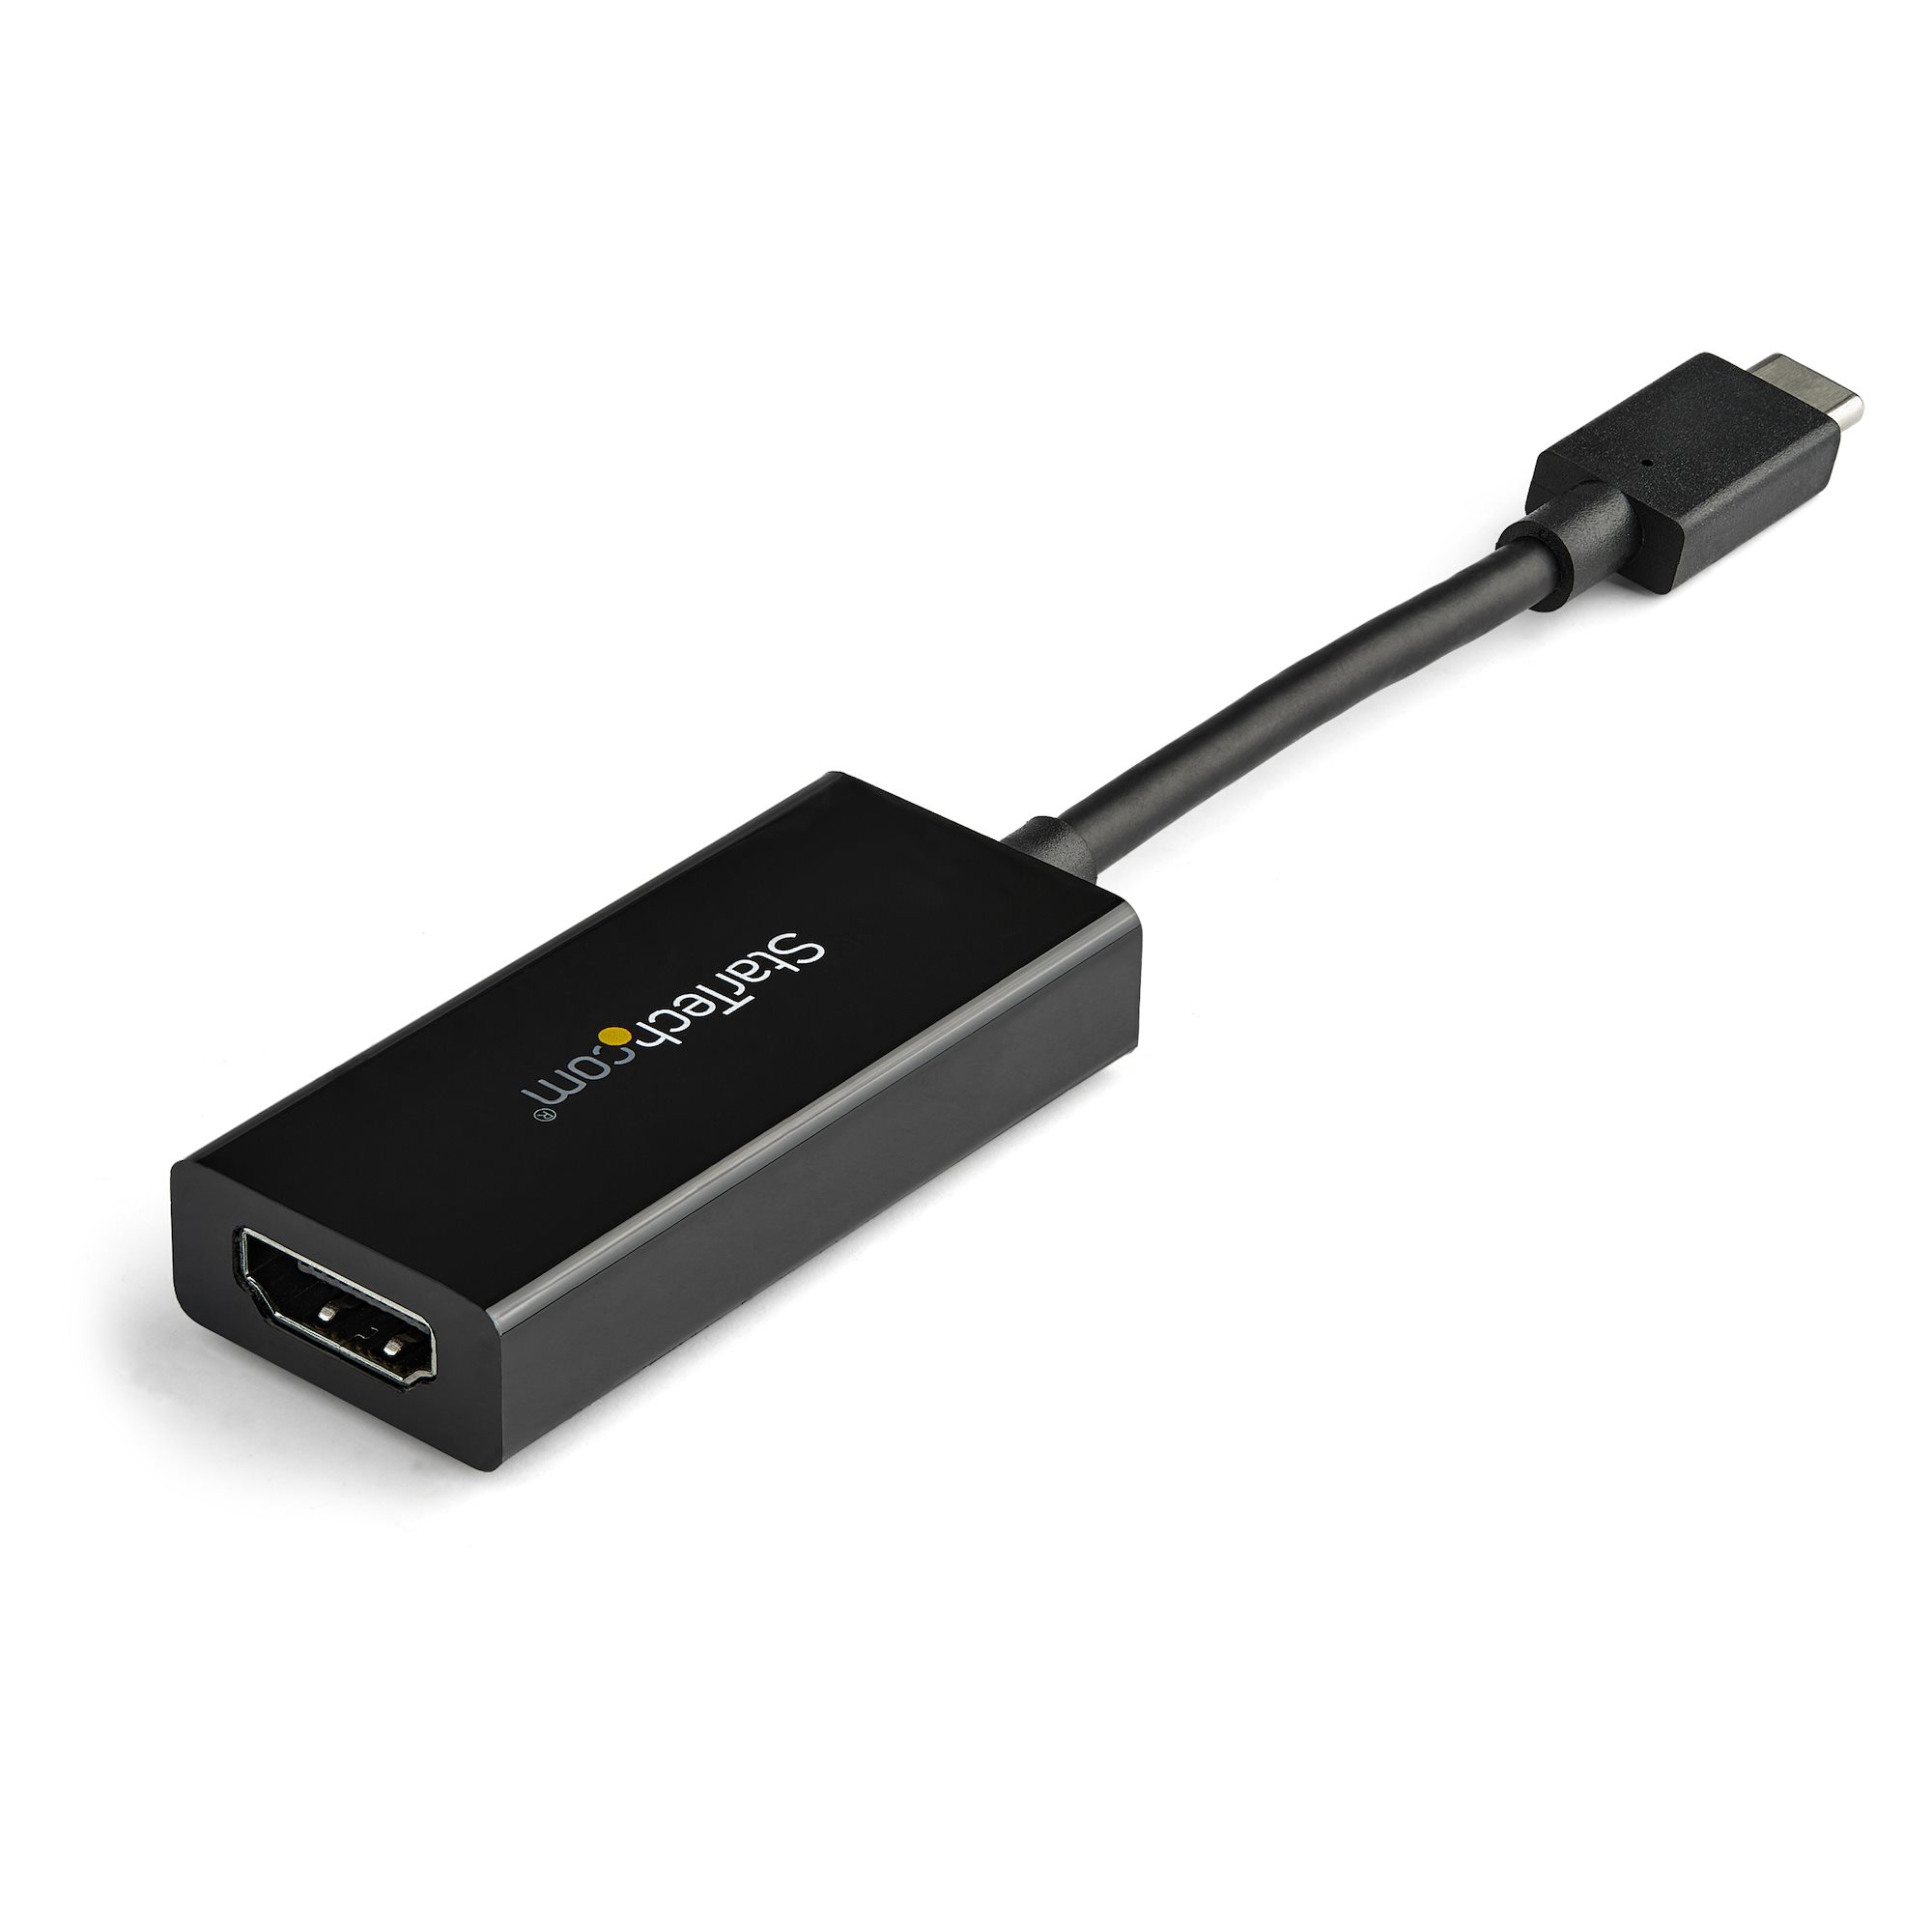 USB C to HDMI Adapter - 4K 60Hz Video, HDR10 - USB-C to HDMI 2.0b Adapter  Dongle - USB Type-C DP Alt Mode to HDMI Monitor/Display/TV - USB C to HDMI 